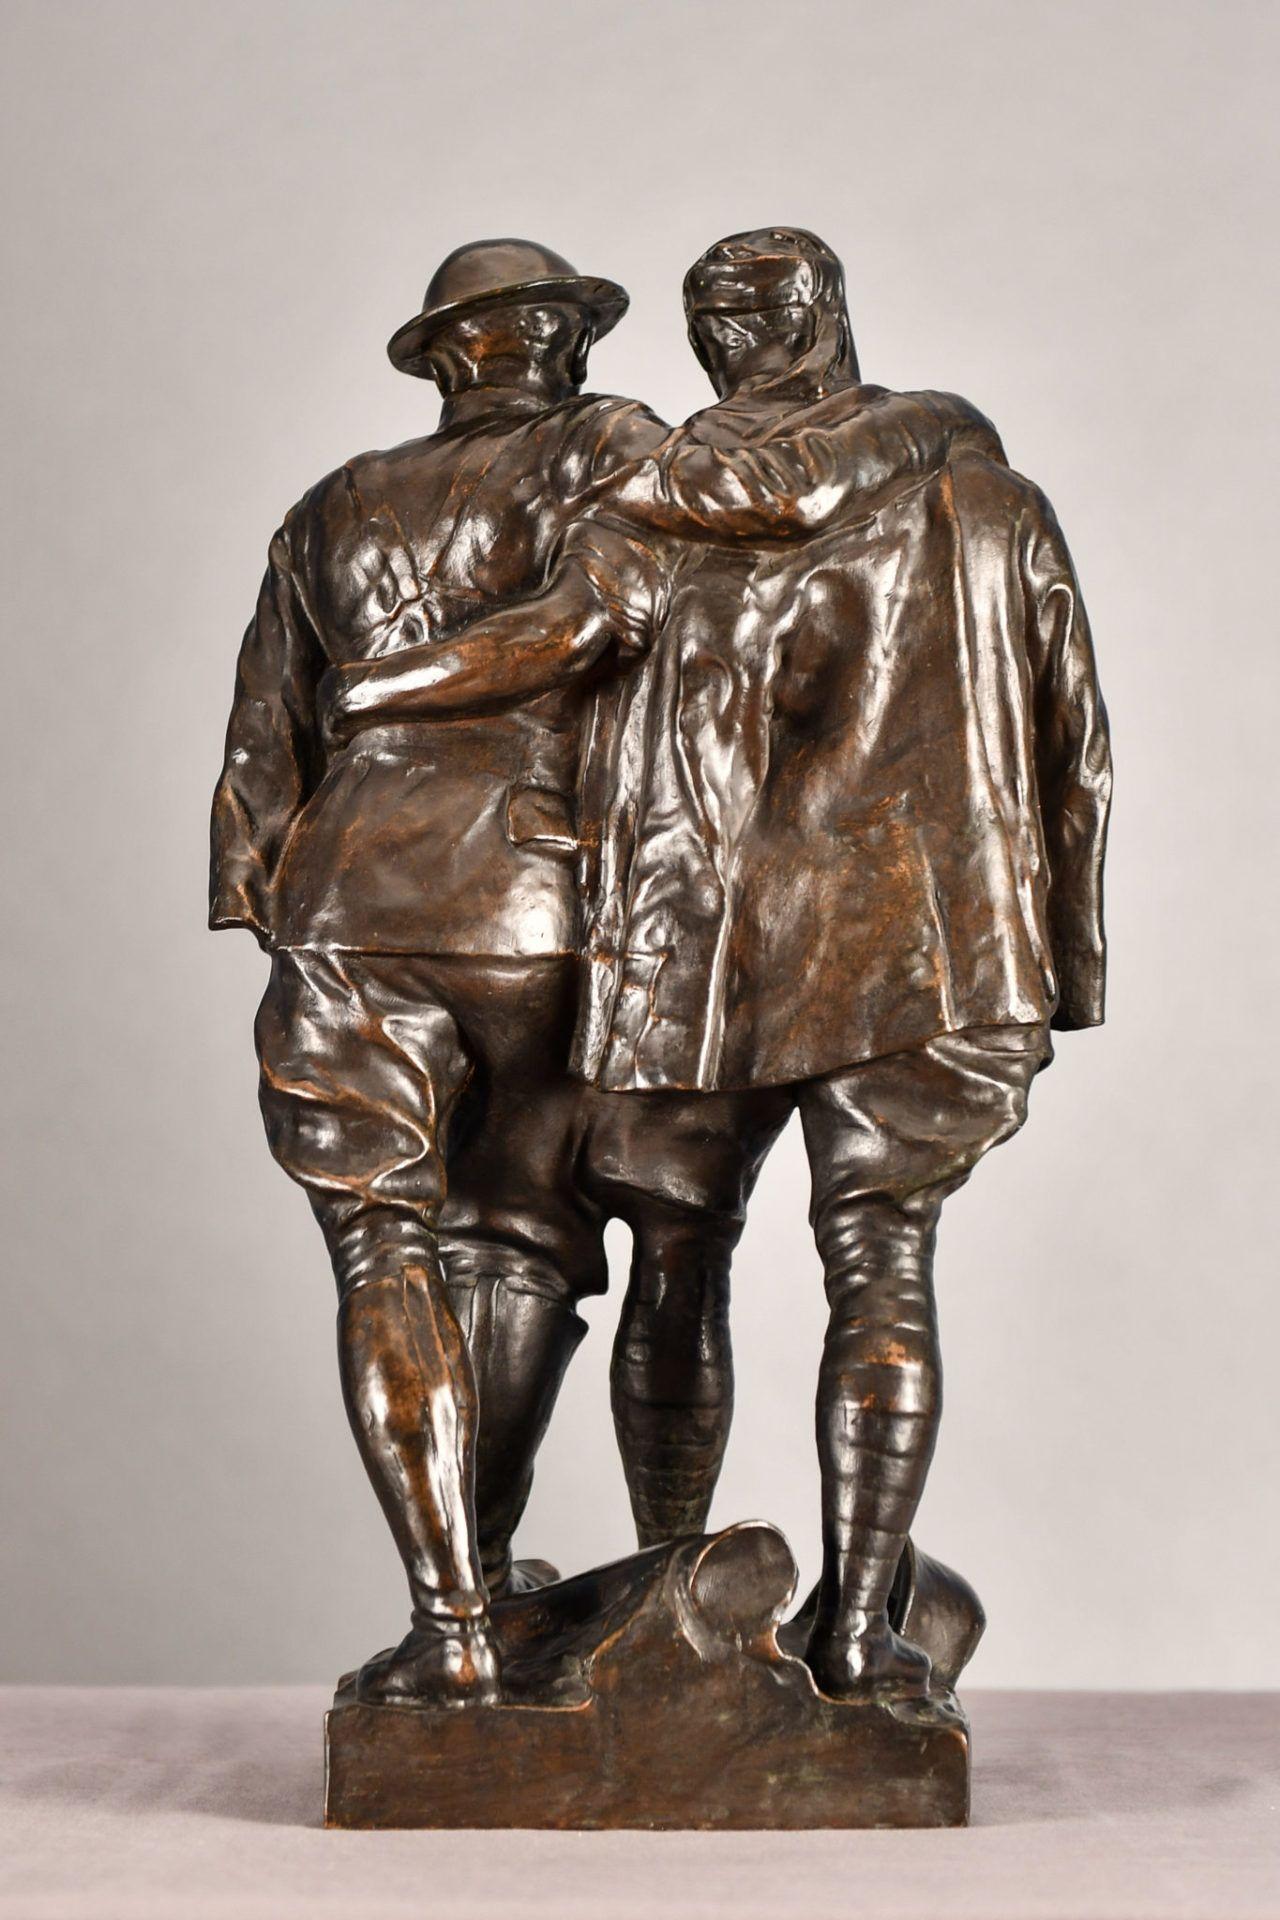 Robert Ingersoll Aitken
Comrades in Arms (Brothers in Arms), 1919
Inscribed 